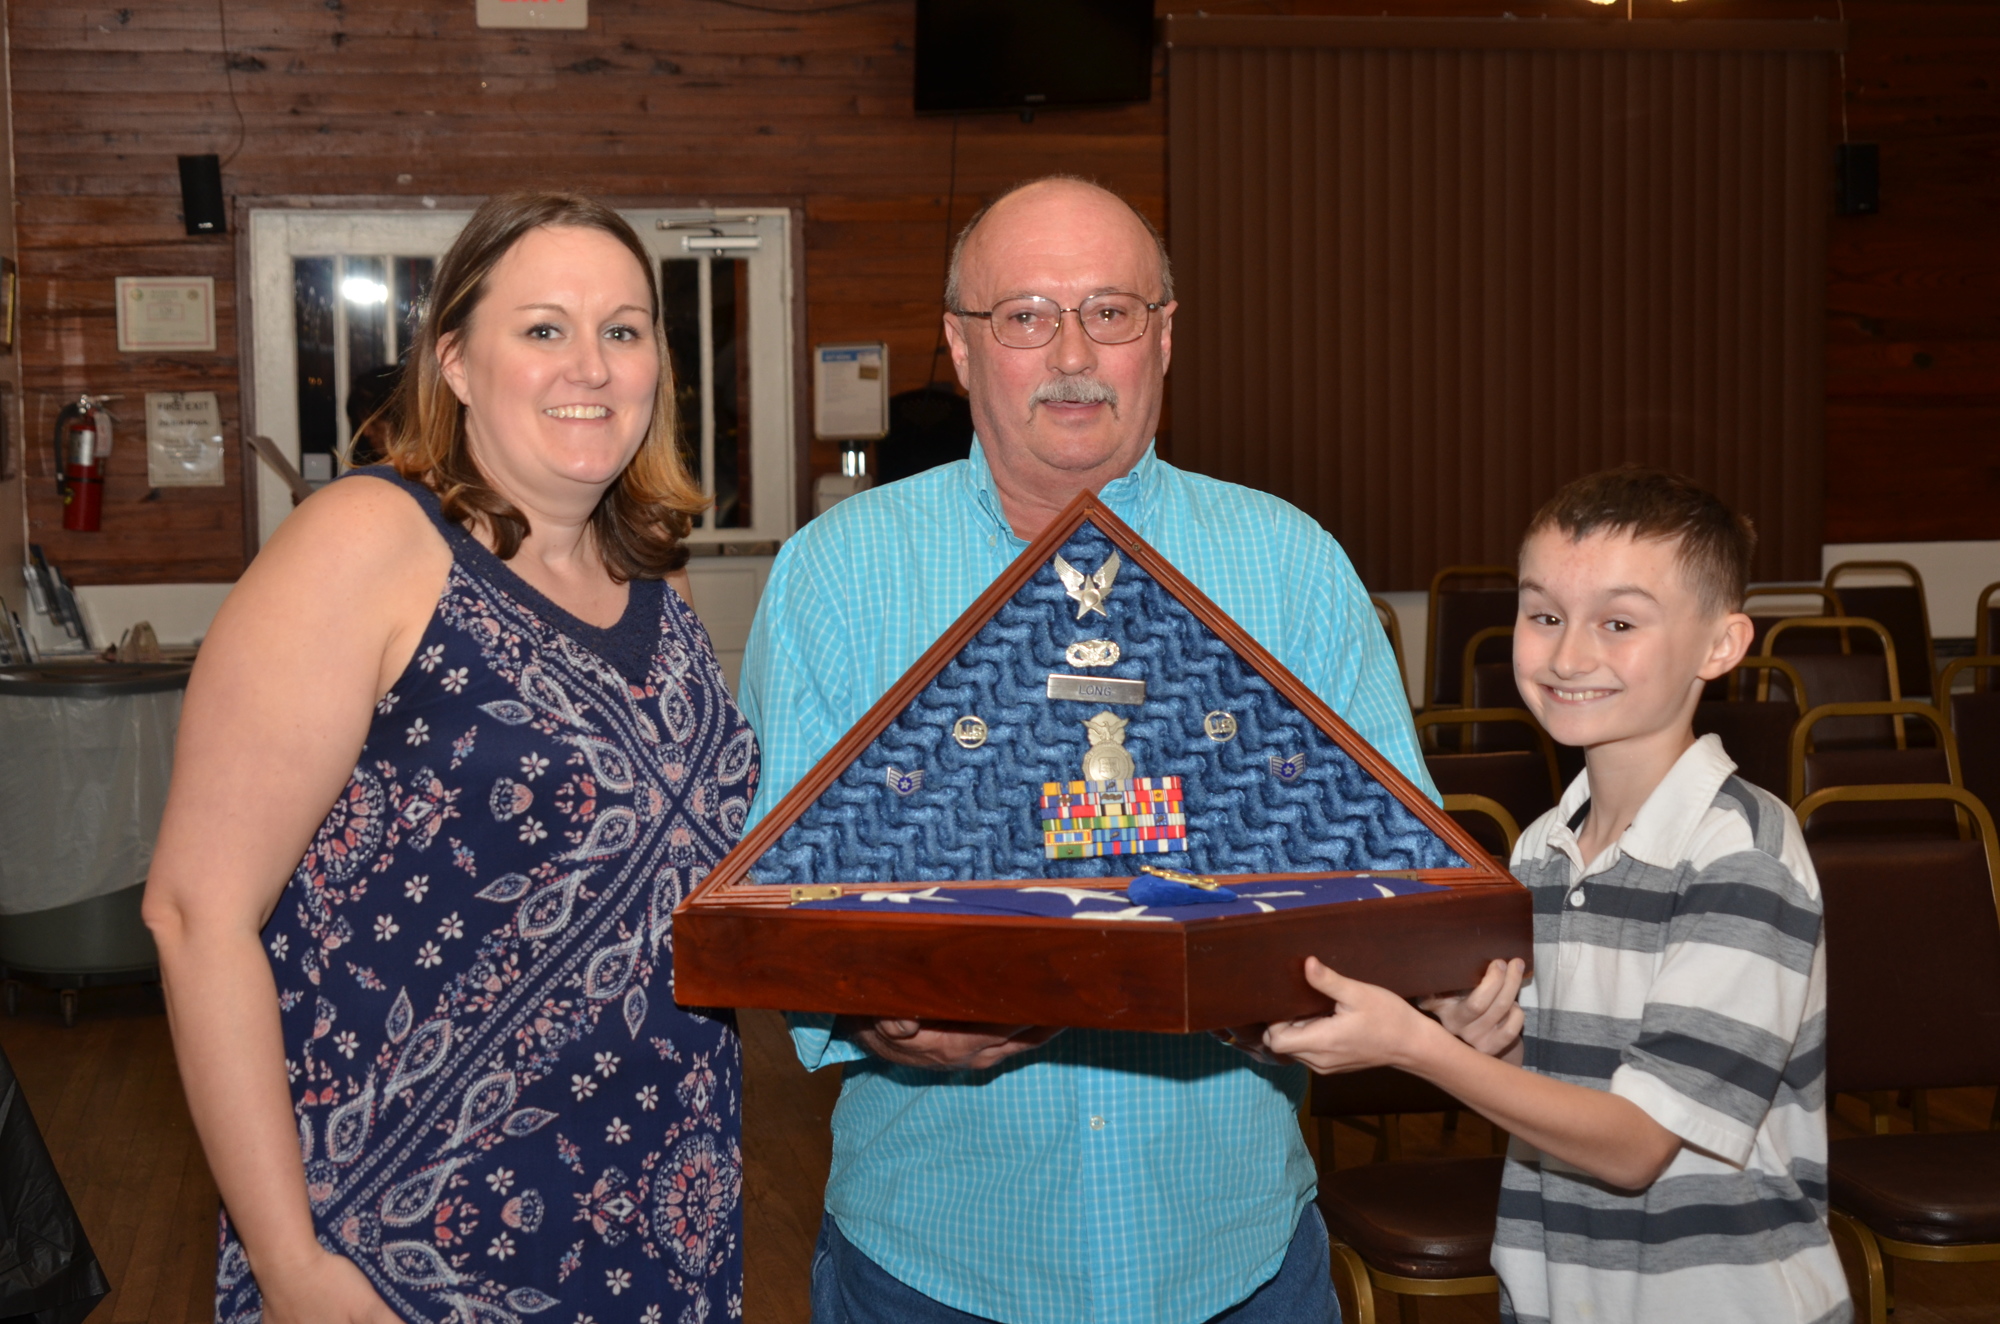 The Long family is grateful to have Mike Long's military shadow box.